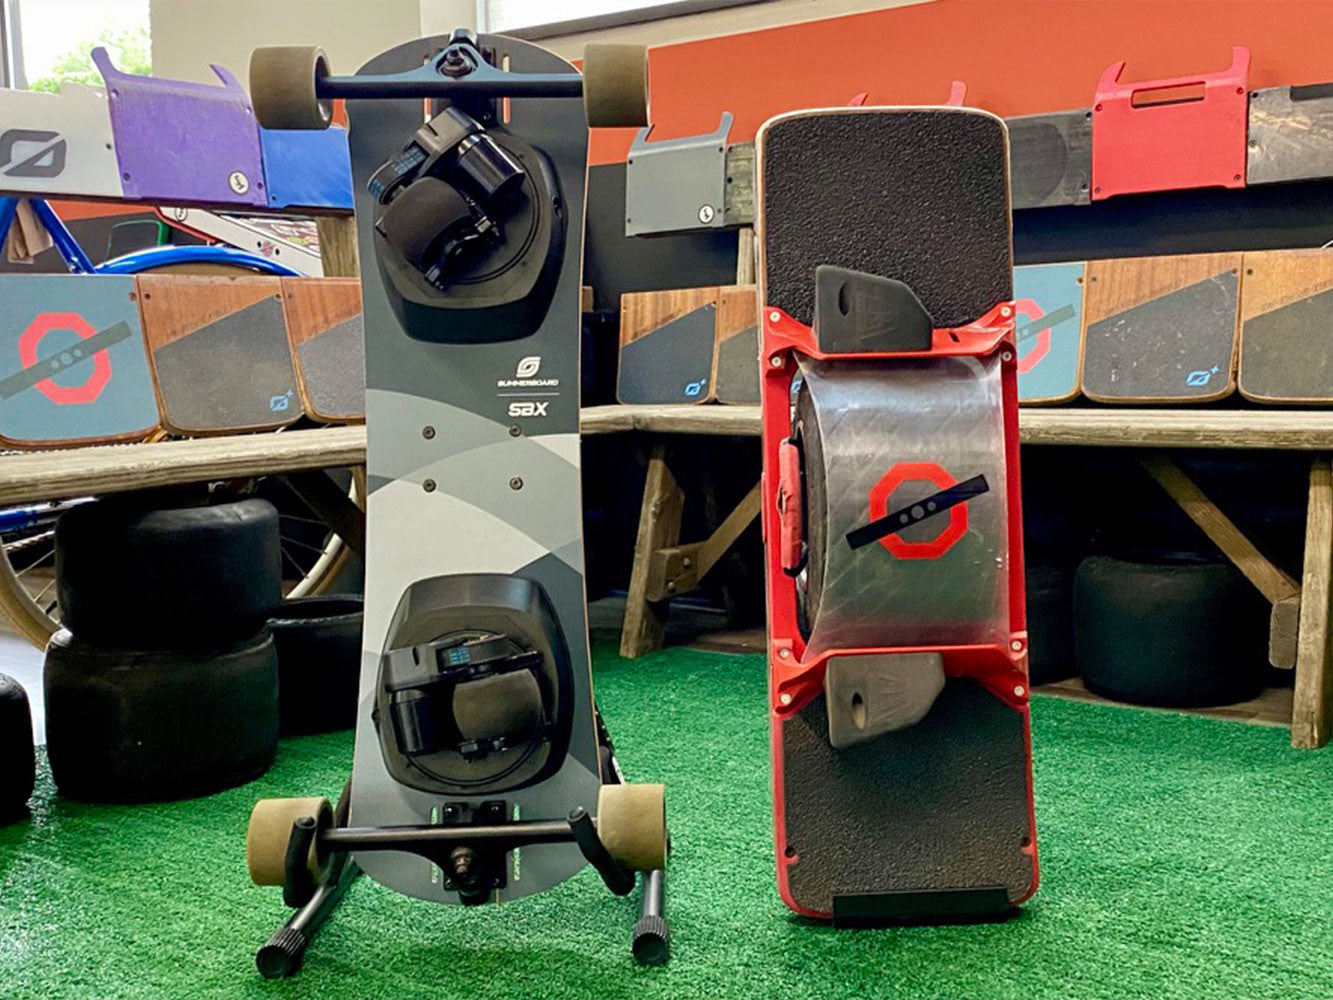 Summerboard vs. Onewheel™: Which Is Right for You?